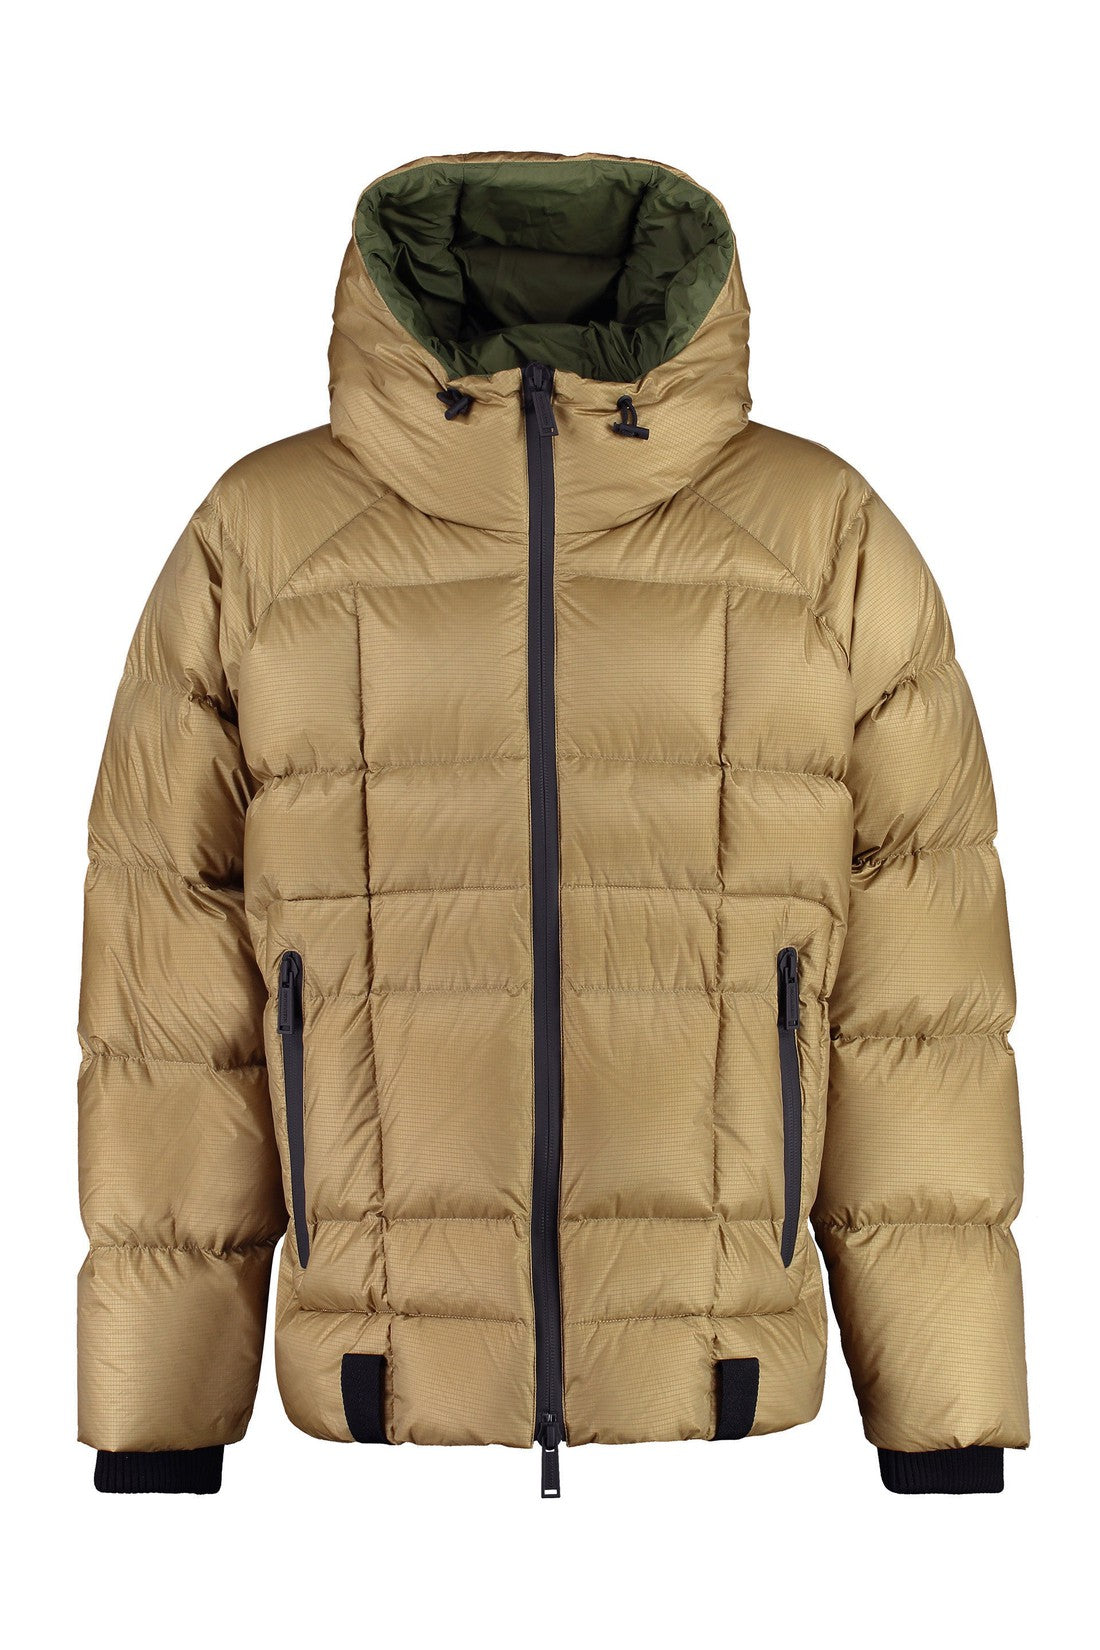 Dsquared2-OUTLET-SALE-Kaban hooded techno fabric down jacket-ARCHIVIST